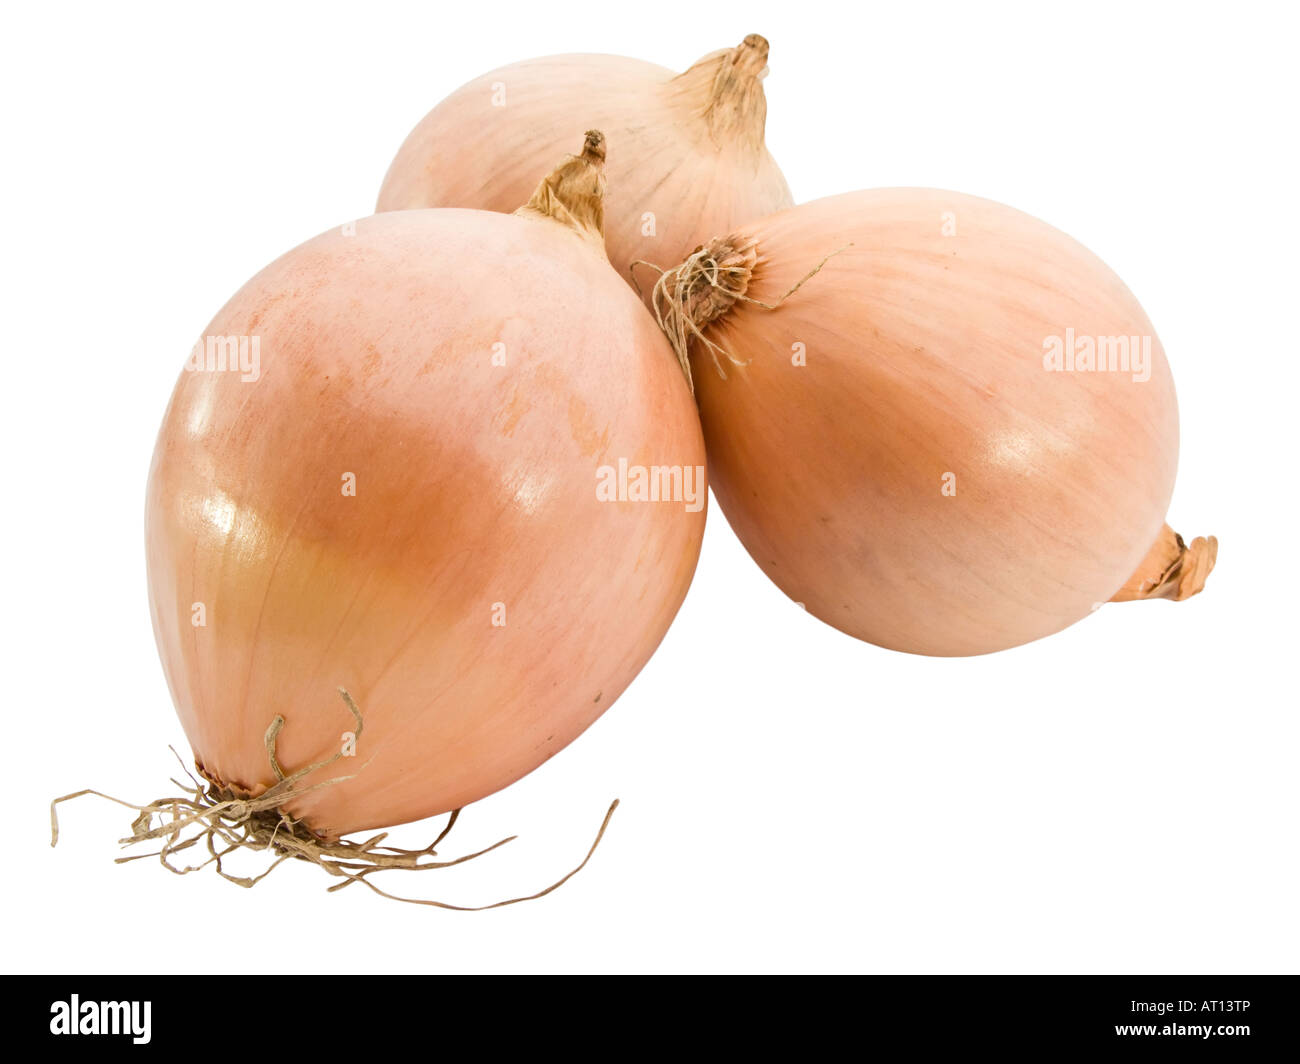 Onions isolated over white background Stock Photo